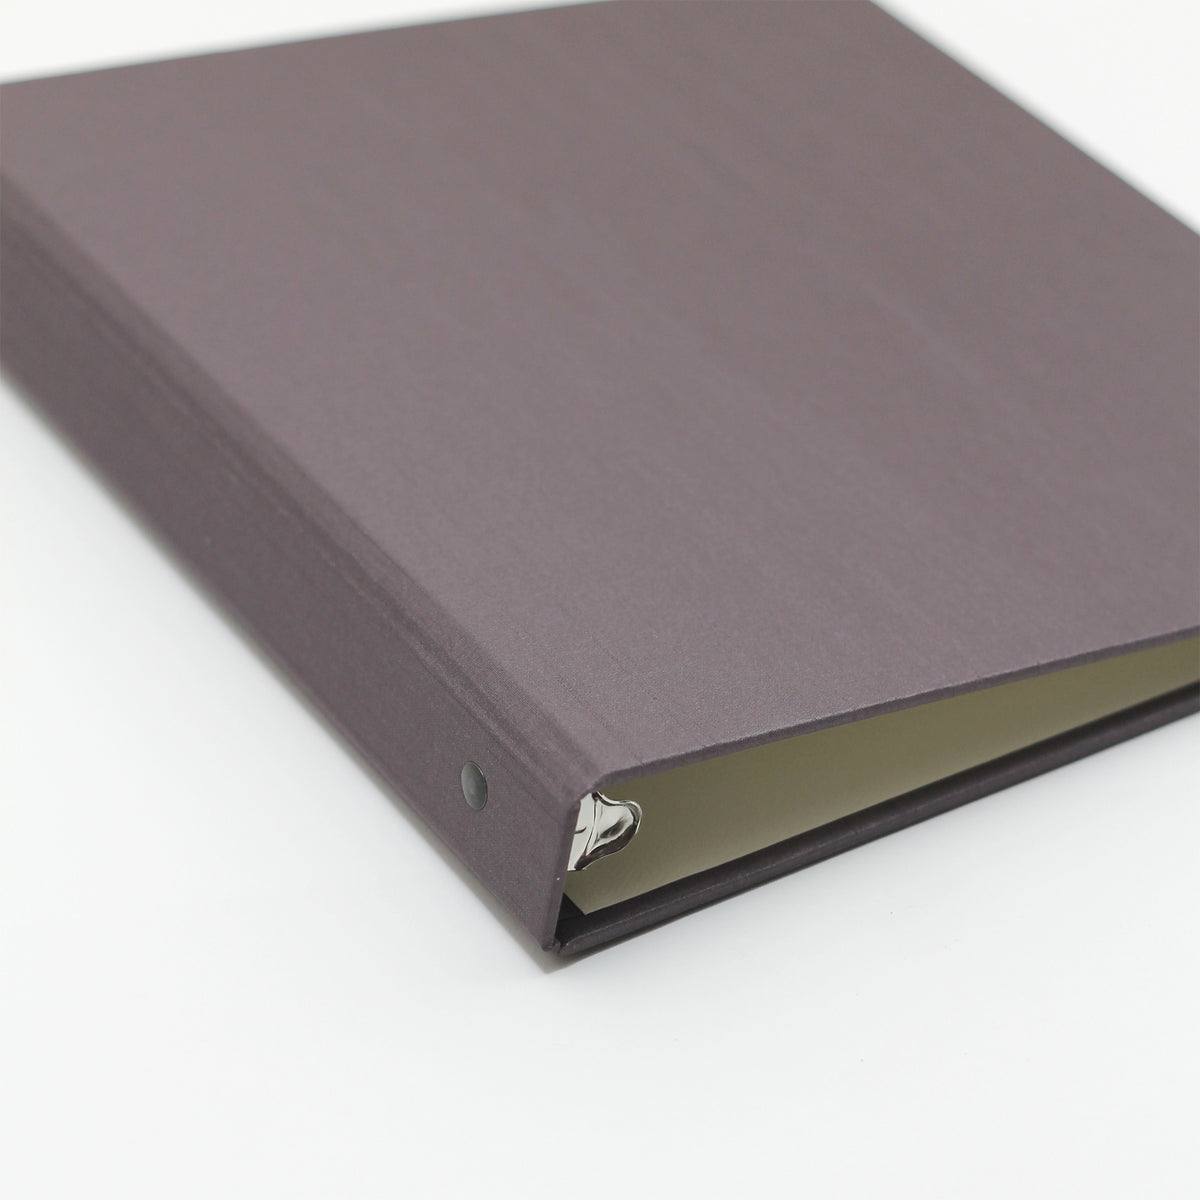 Large Photo Binder For 4x6 Photos | Cover: Amethyst Silk | Available Personalized